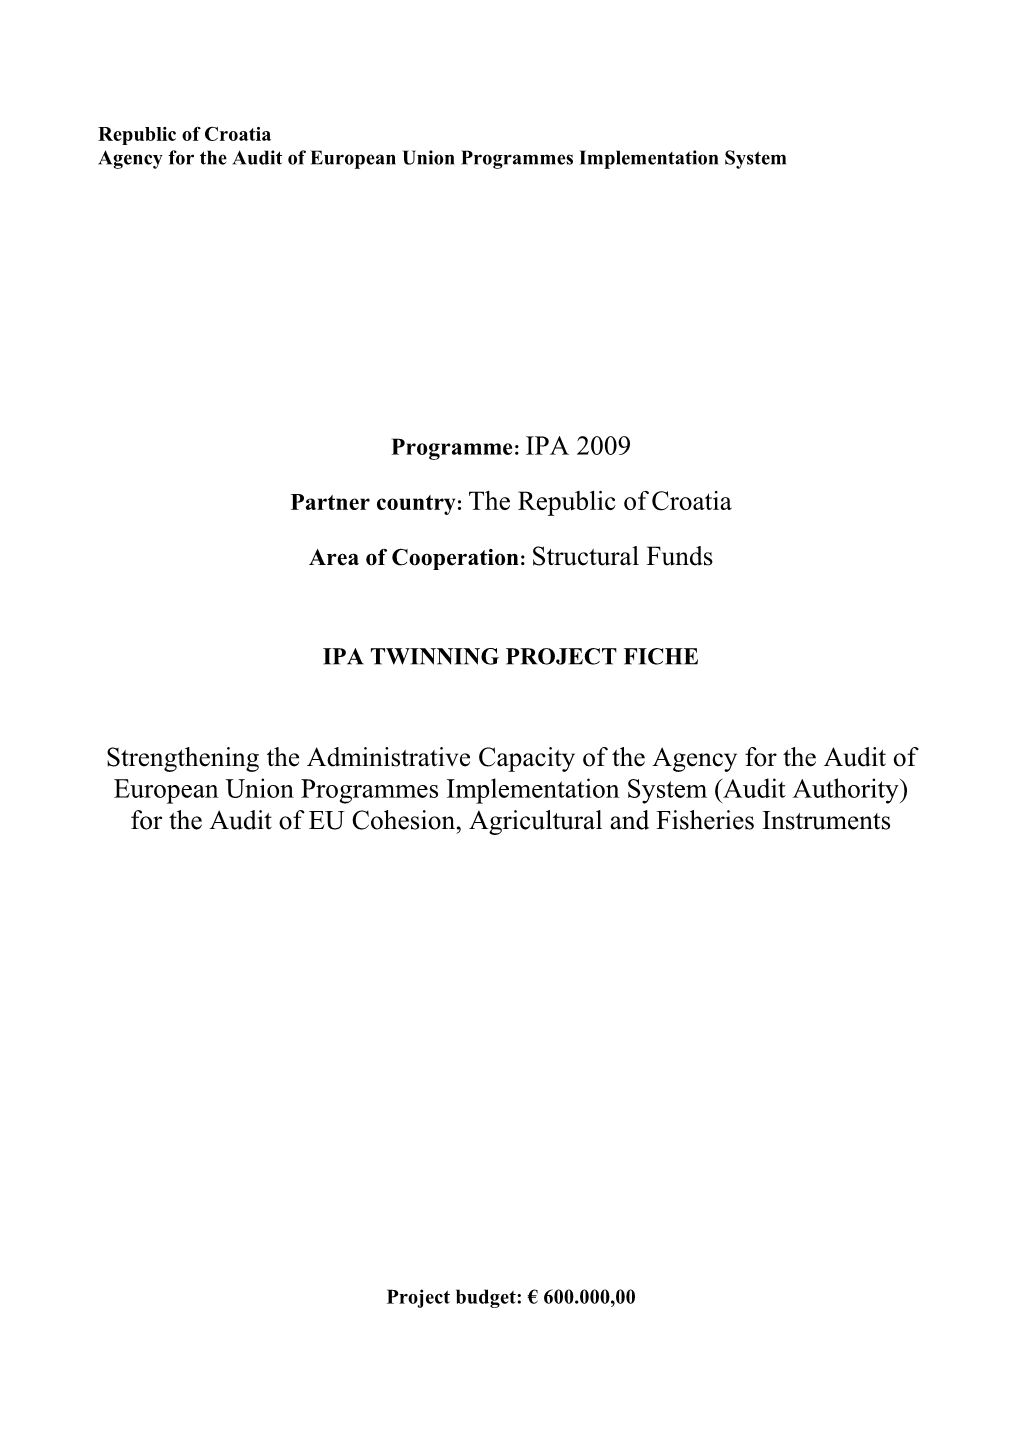 Agency for the Audit of European Union Programmes Implementation System